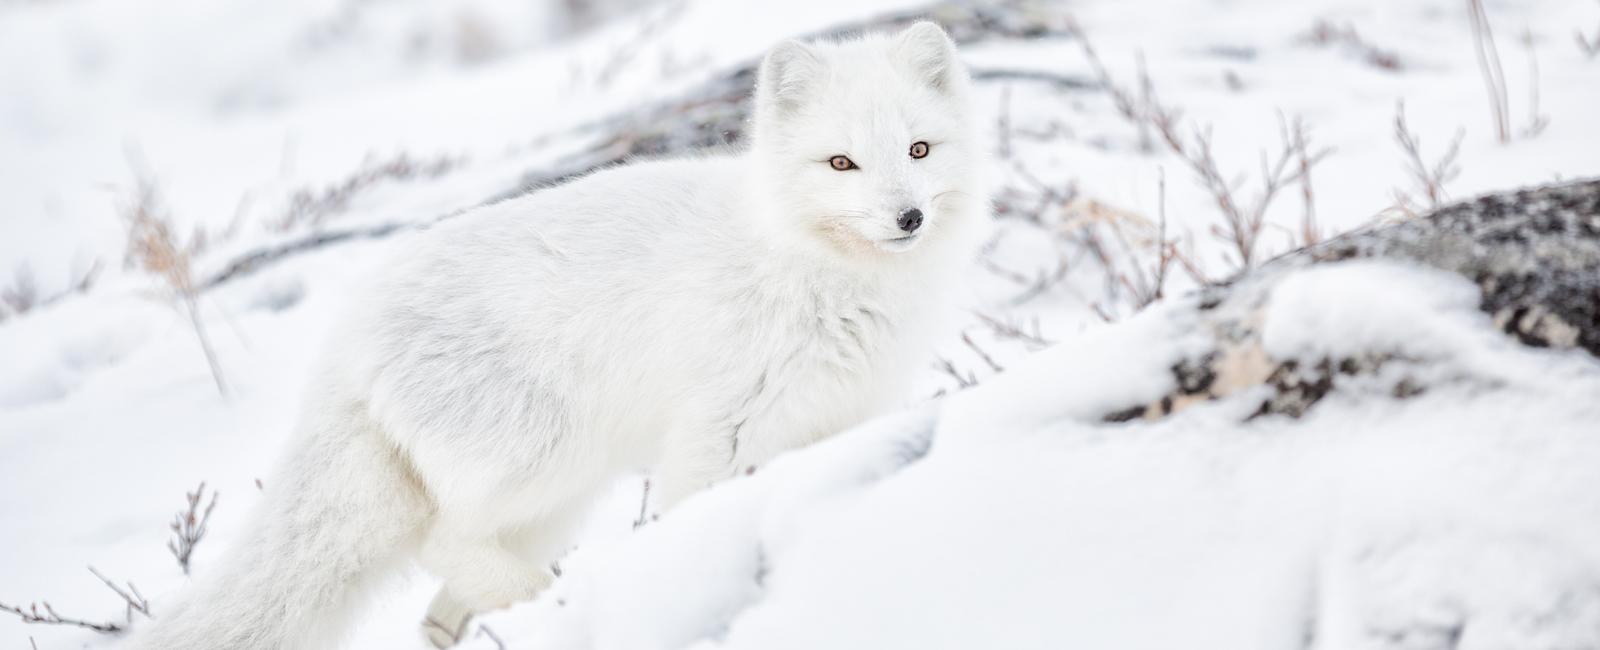 Arctic foxes have an outstanding sense of hearing and smell